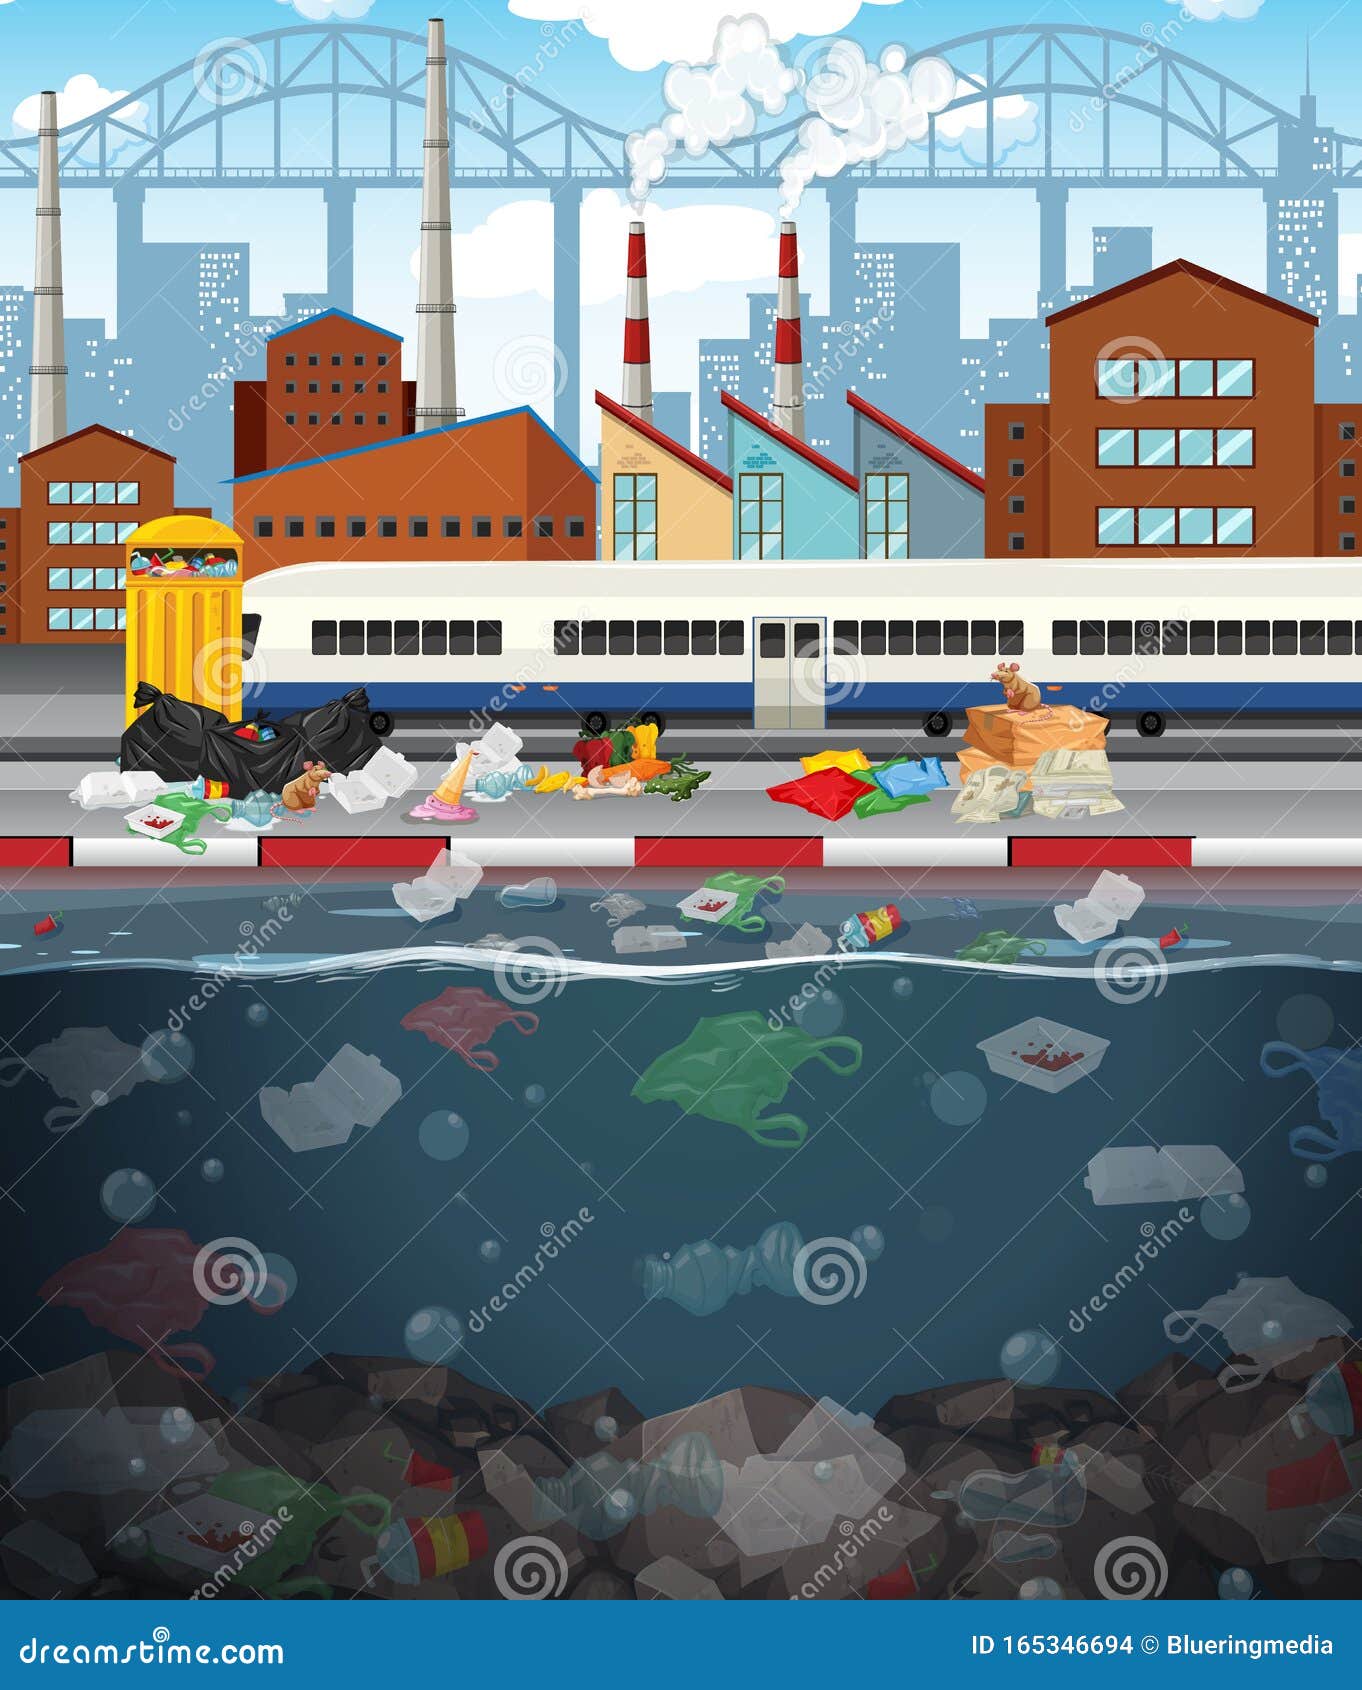 Water Pollution with Plastic Bags in City Stock Vector - Illustration ...